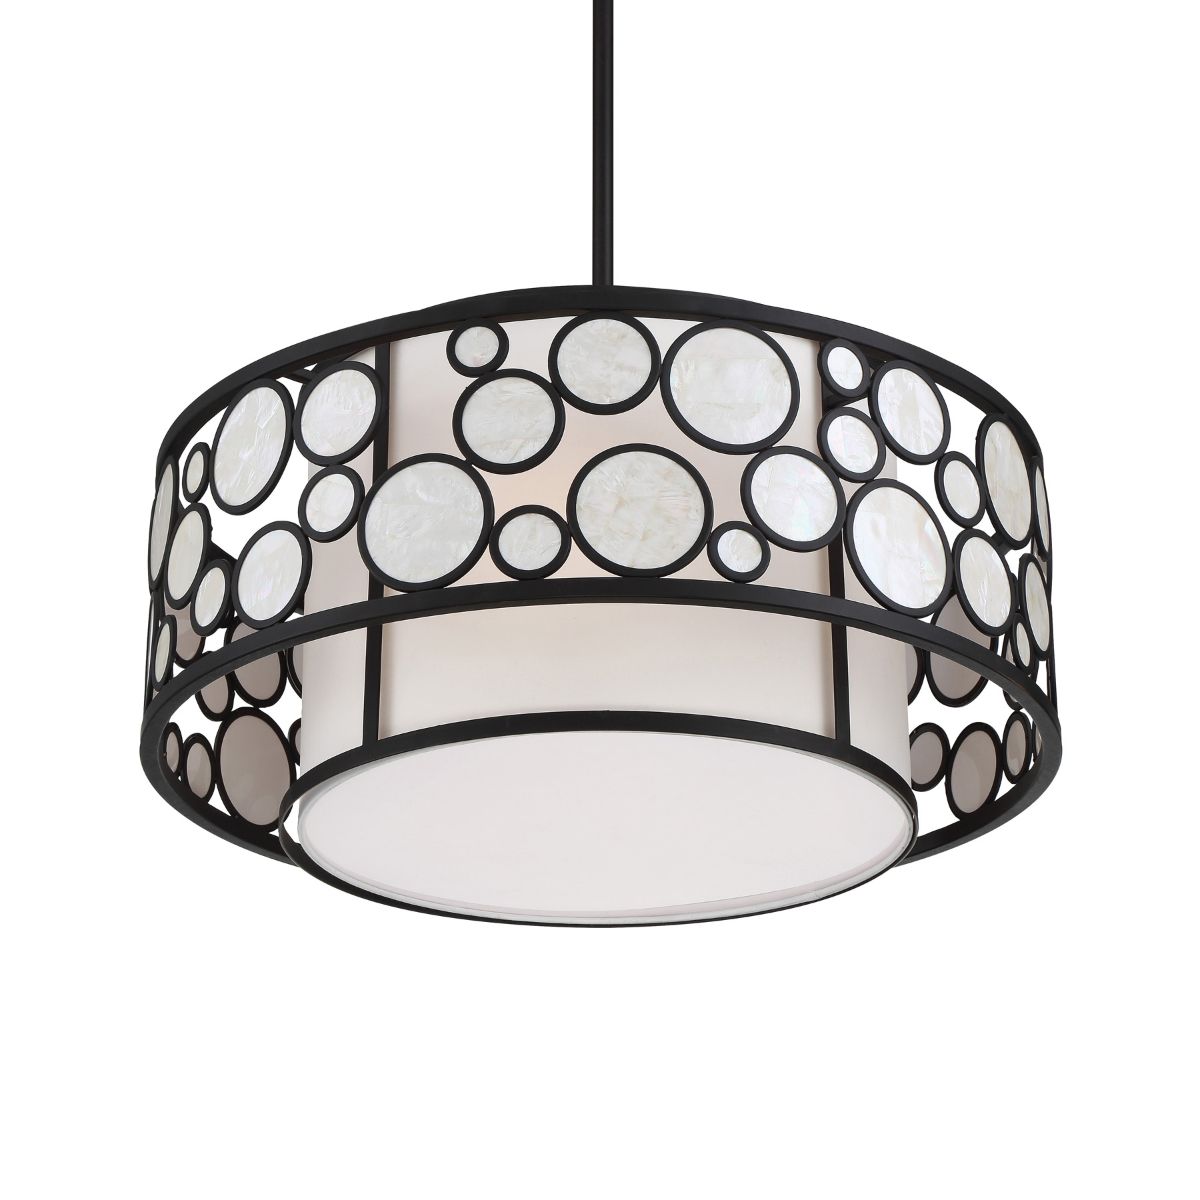 Mosaic 24 in. 4 lights Pendant Light Oil Rubbed Bronze Finish